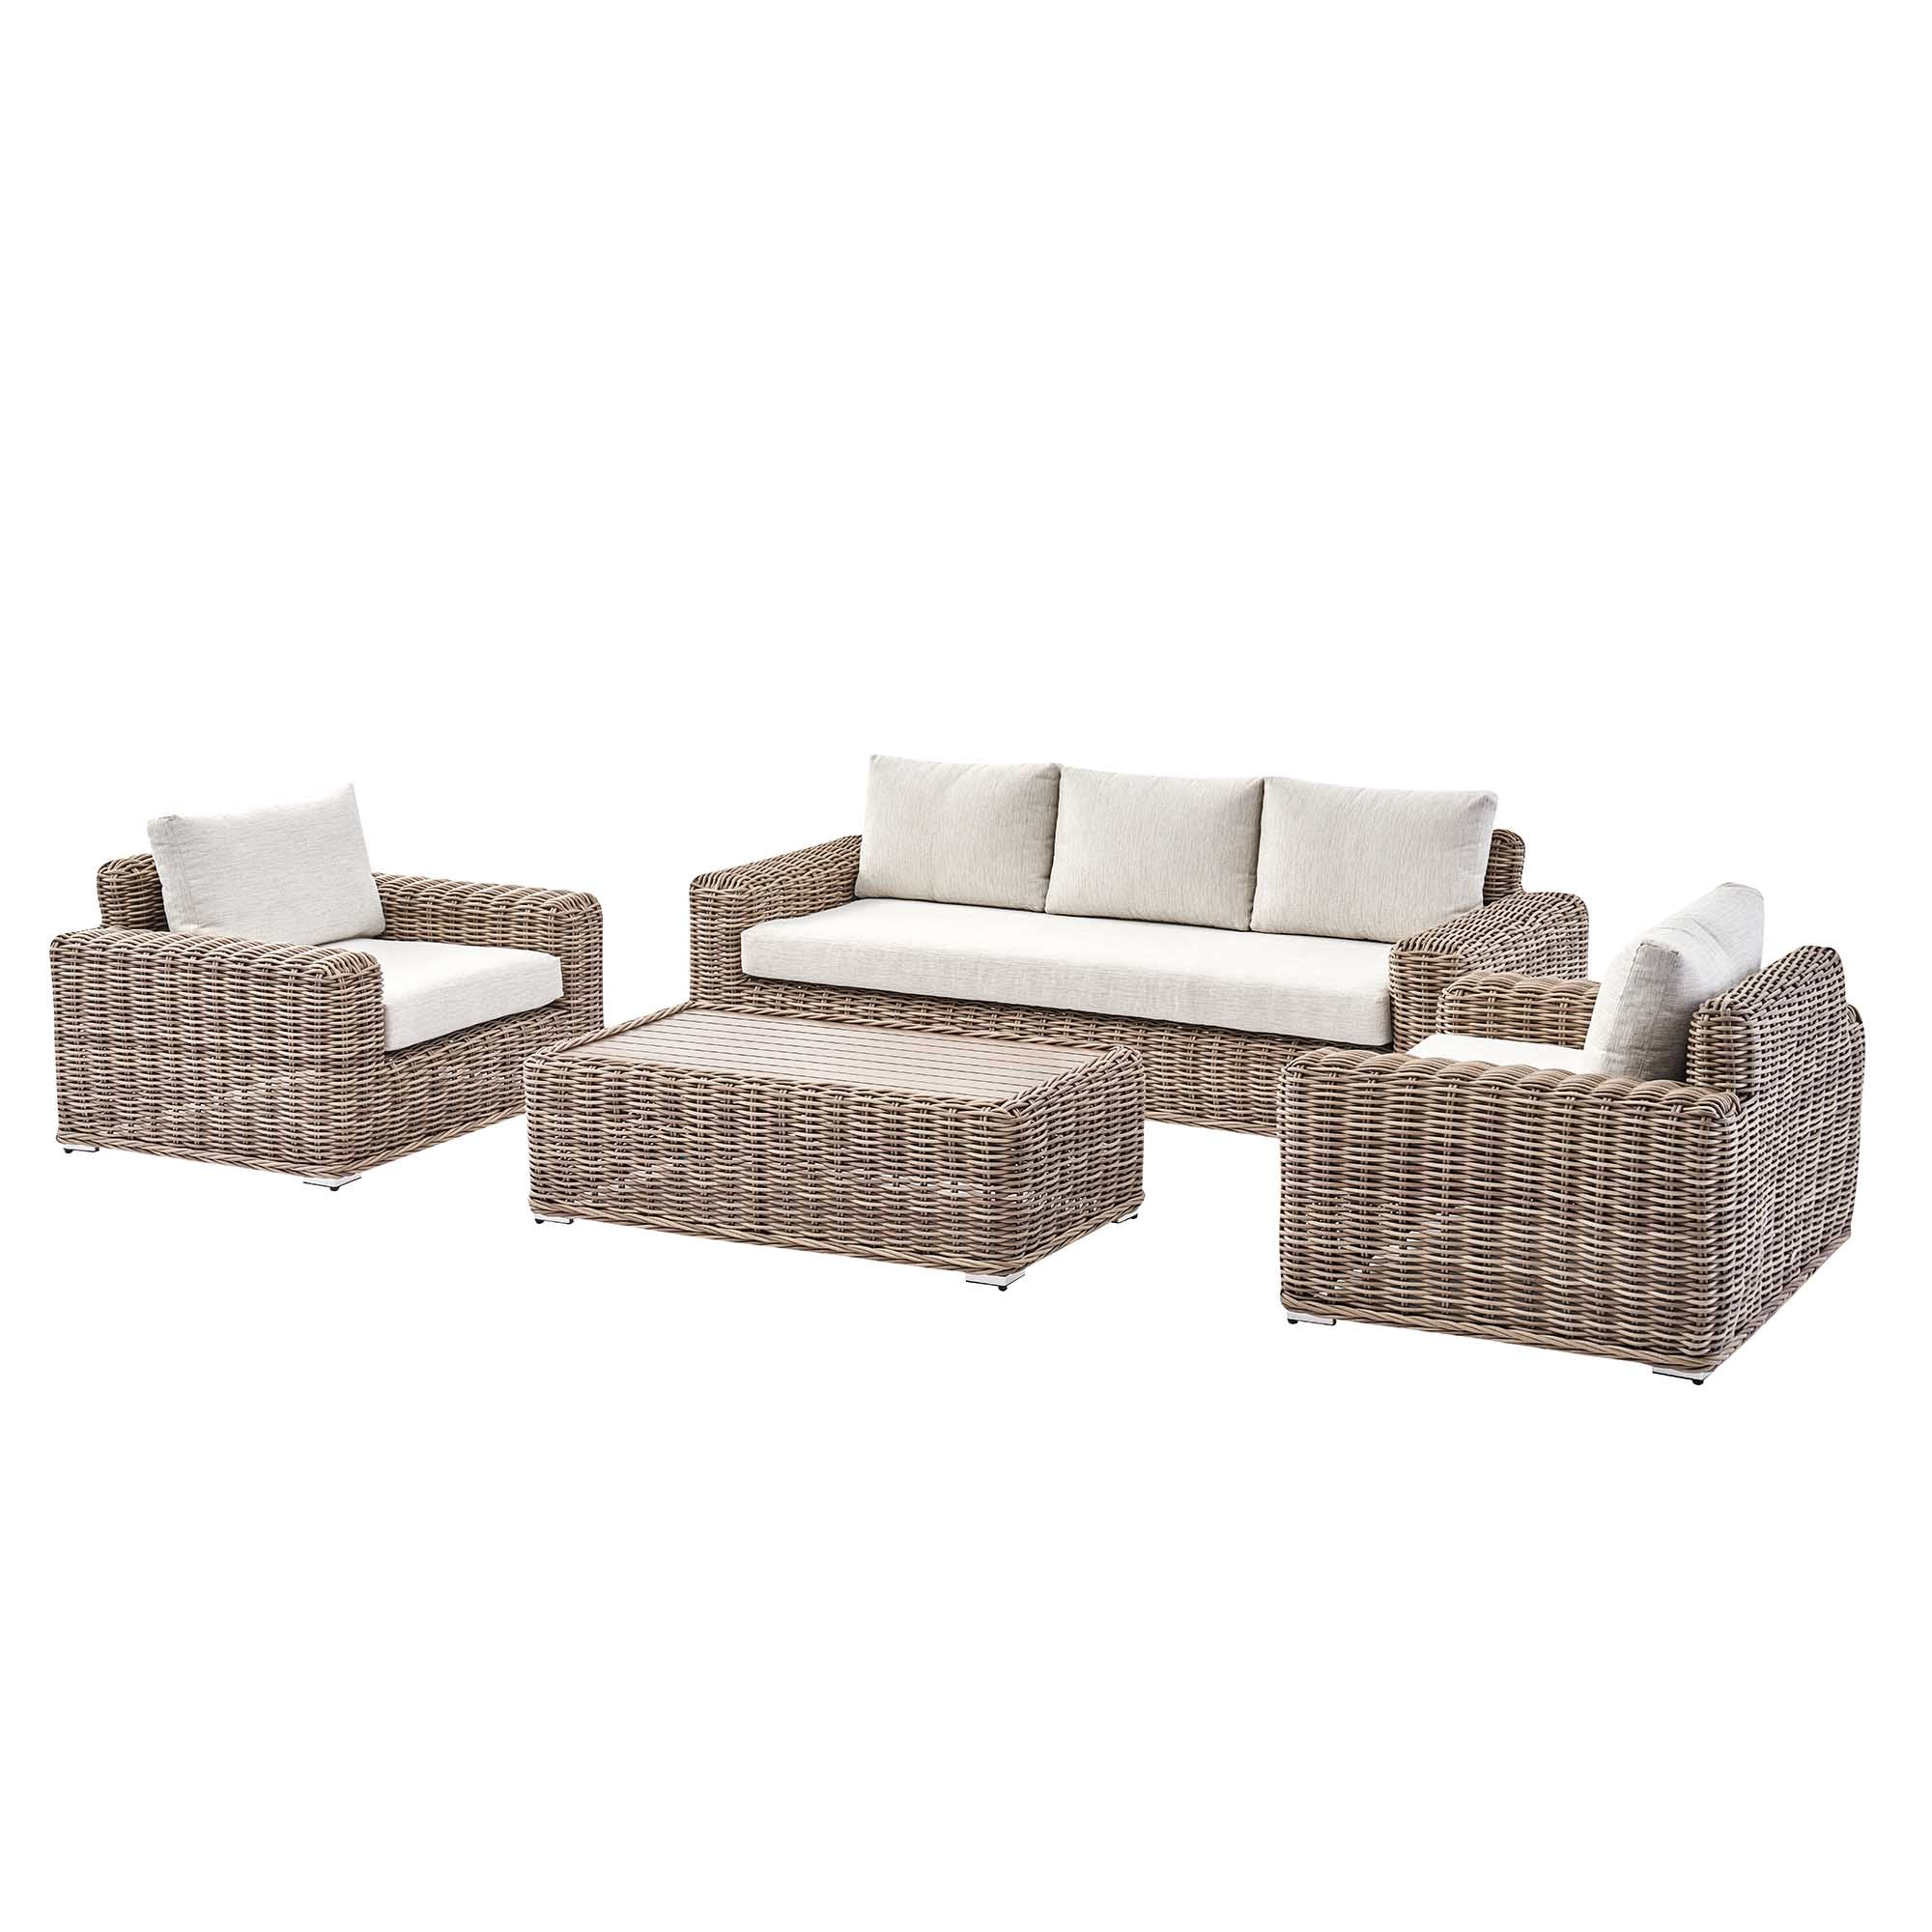 Bellagio Round Wicker Sofa Set with Coffee Table, Natural